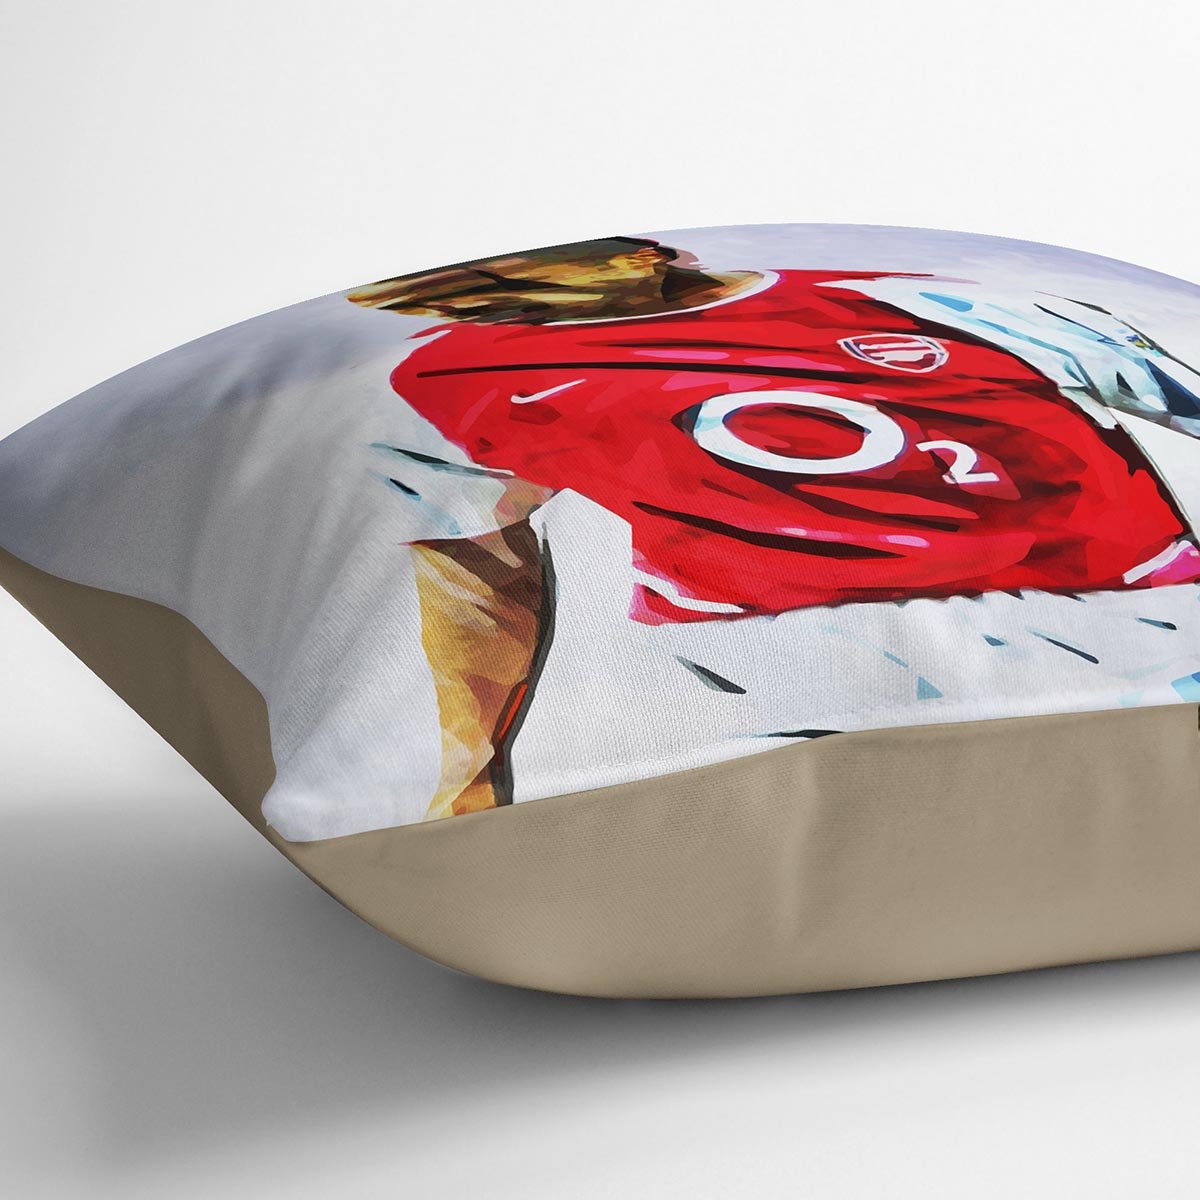 Thierry Henry Kneeslide Cushion